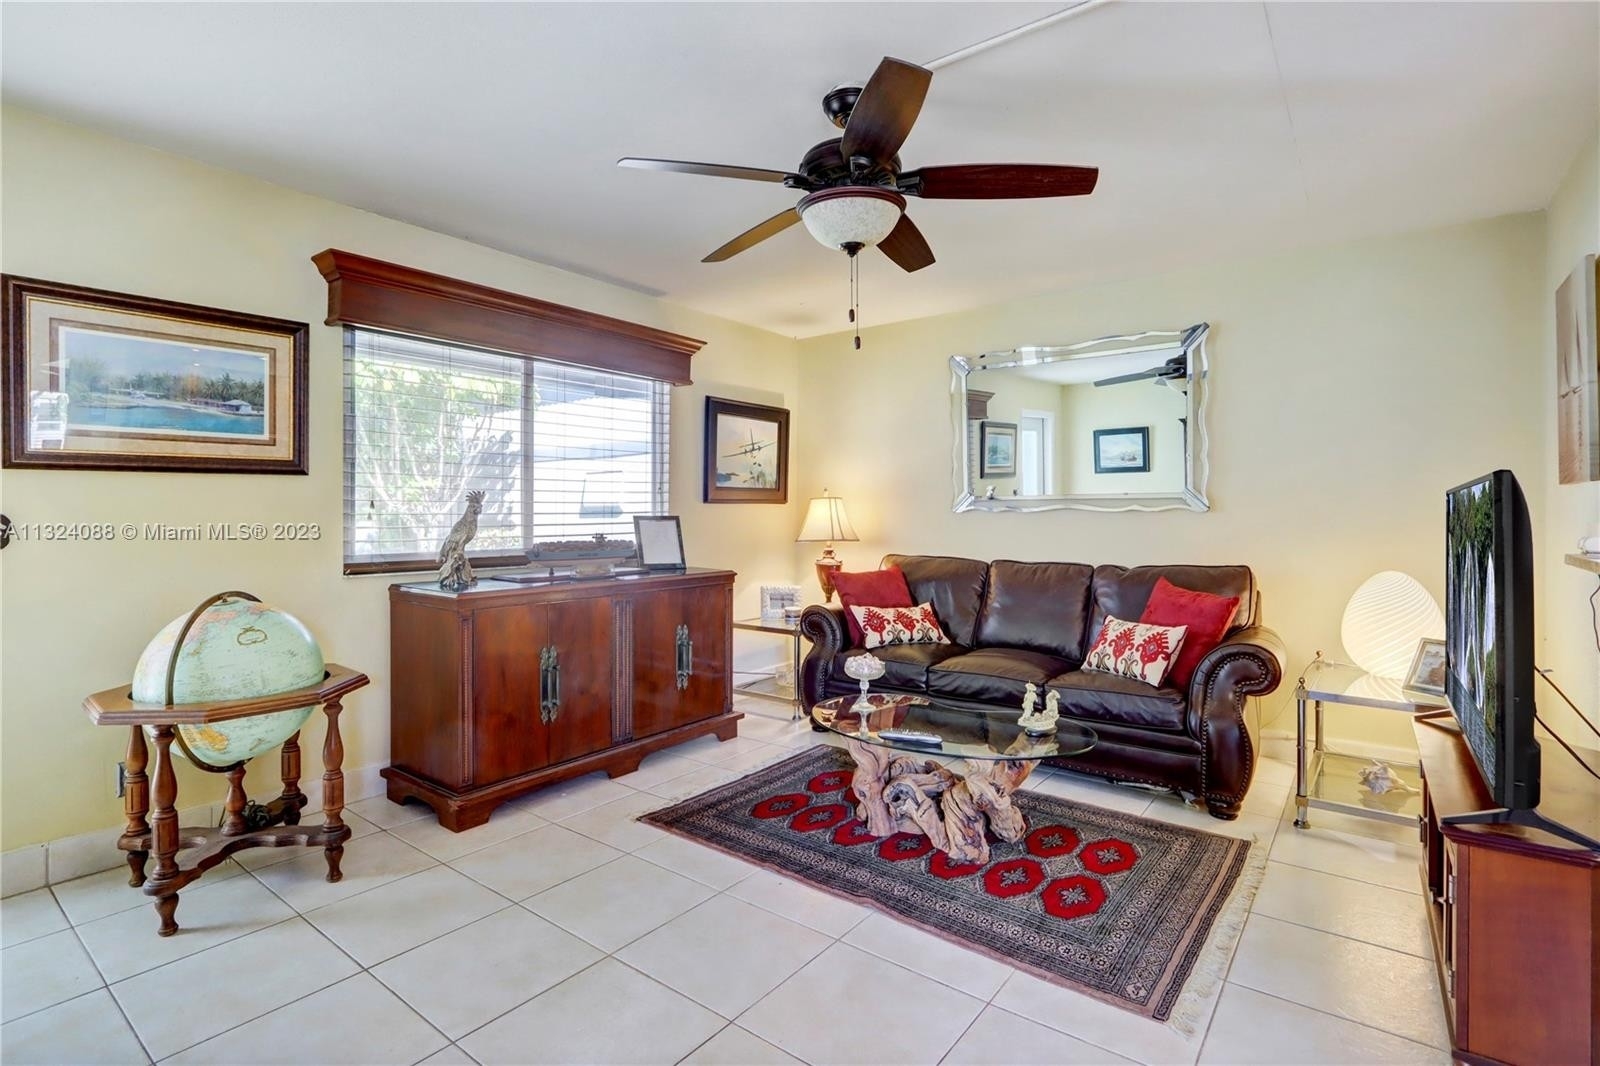 5. Condominiums for Sale at 694 Brittany O , 694 Kings Point, Delray Beach, FL 33446